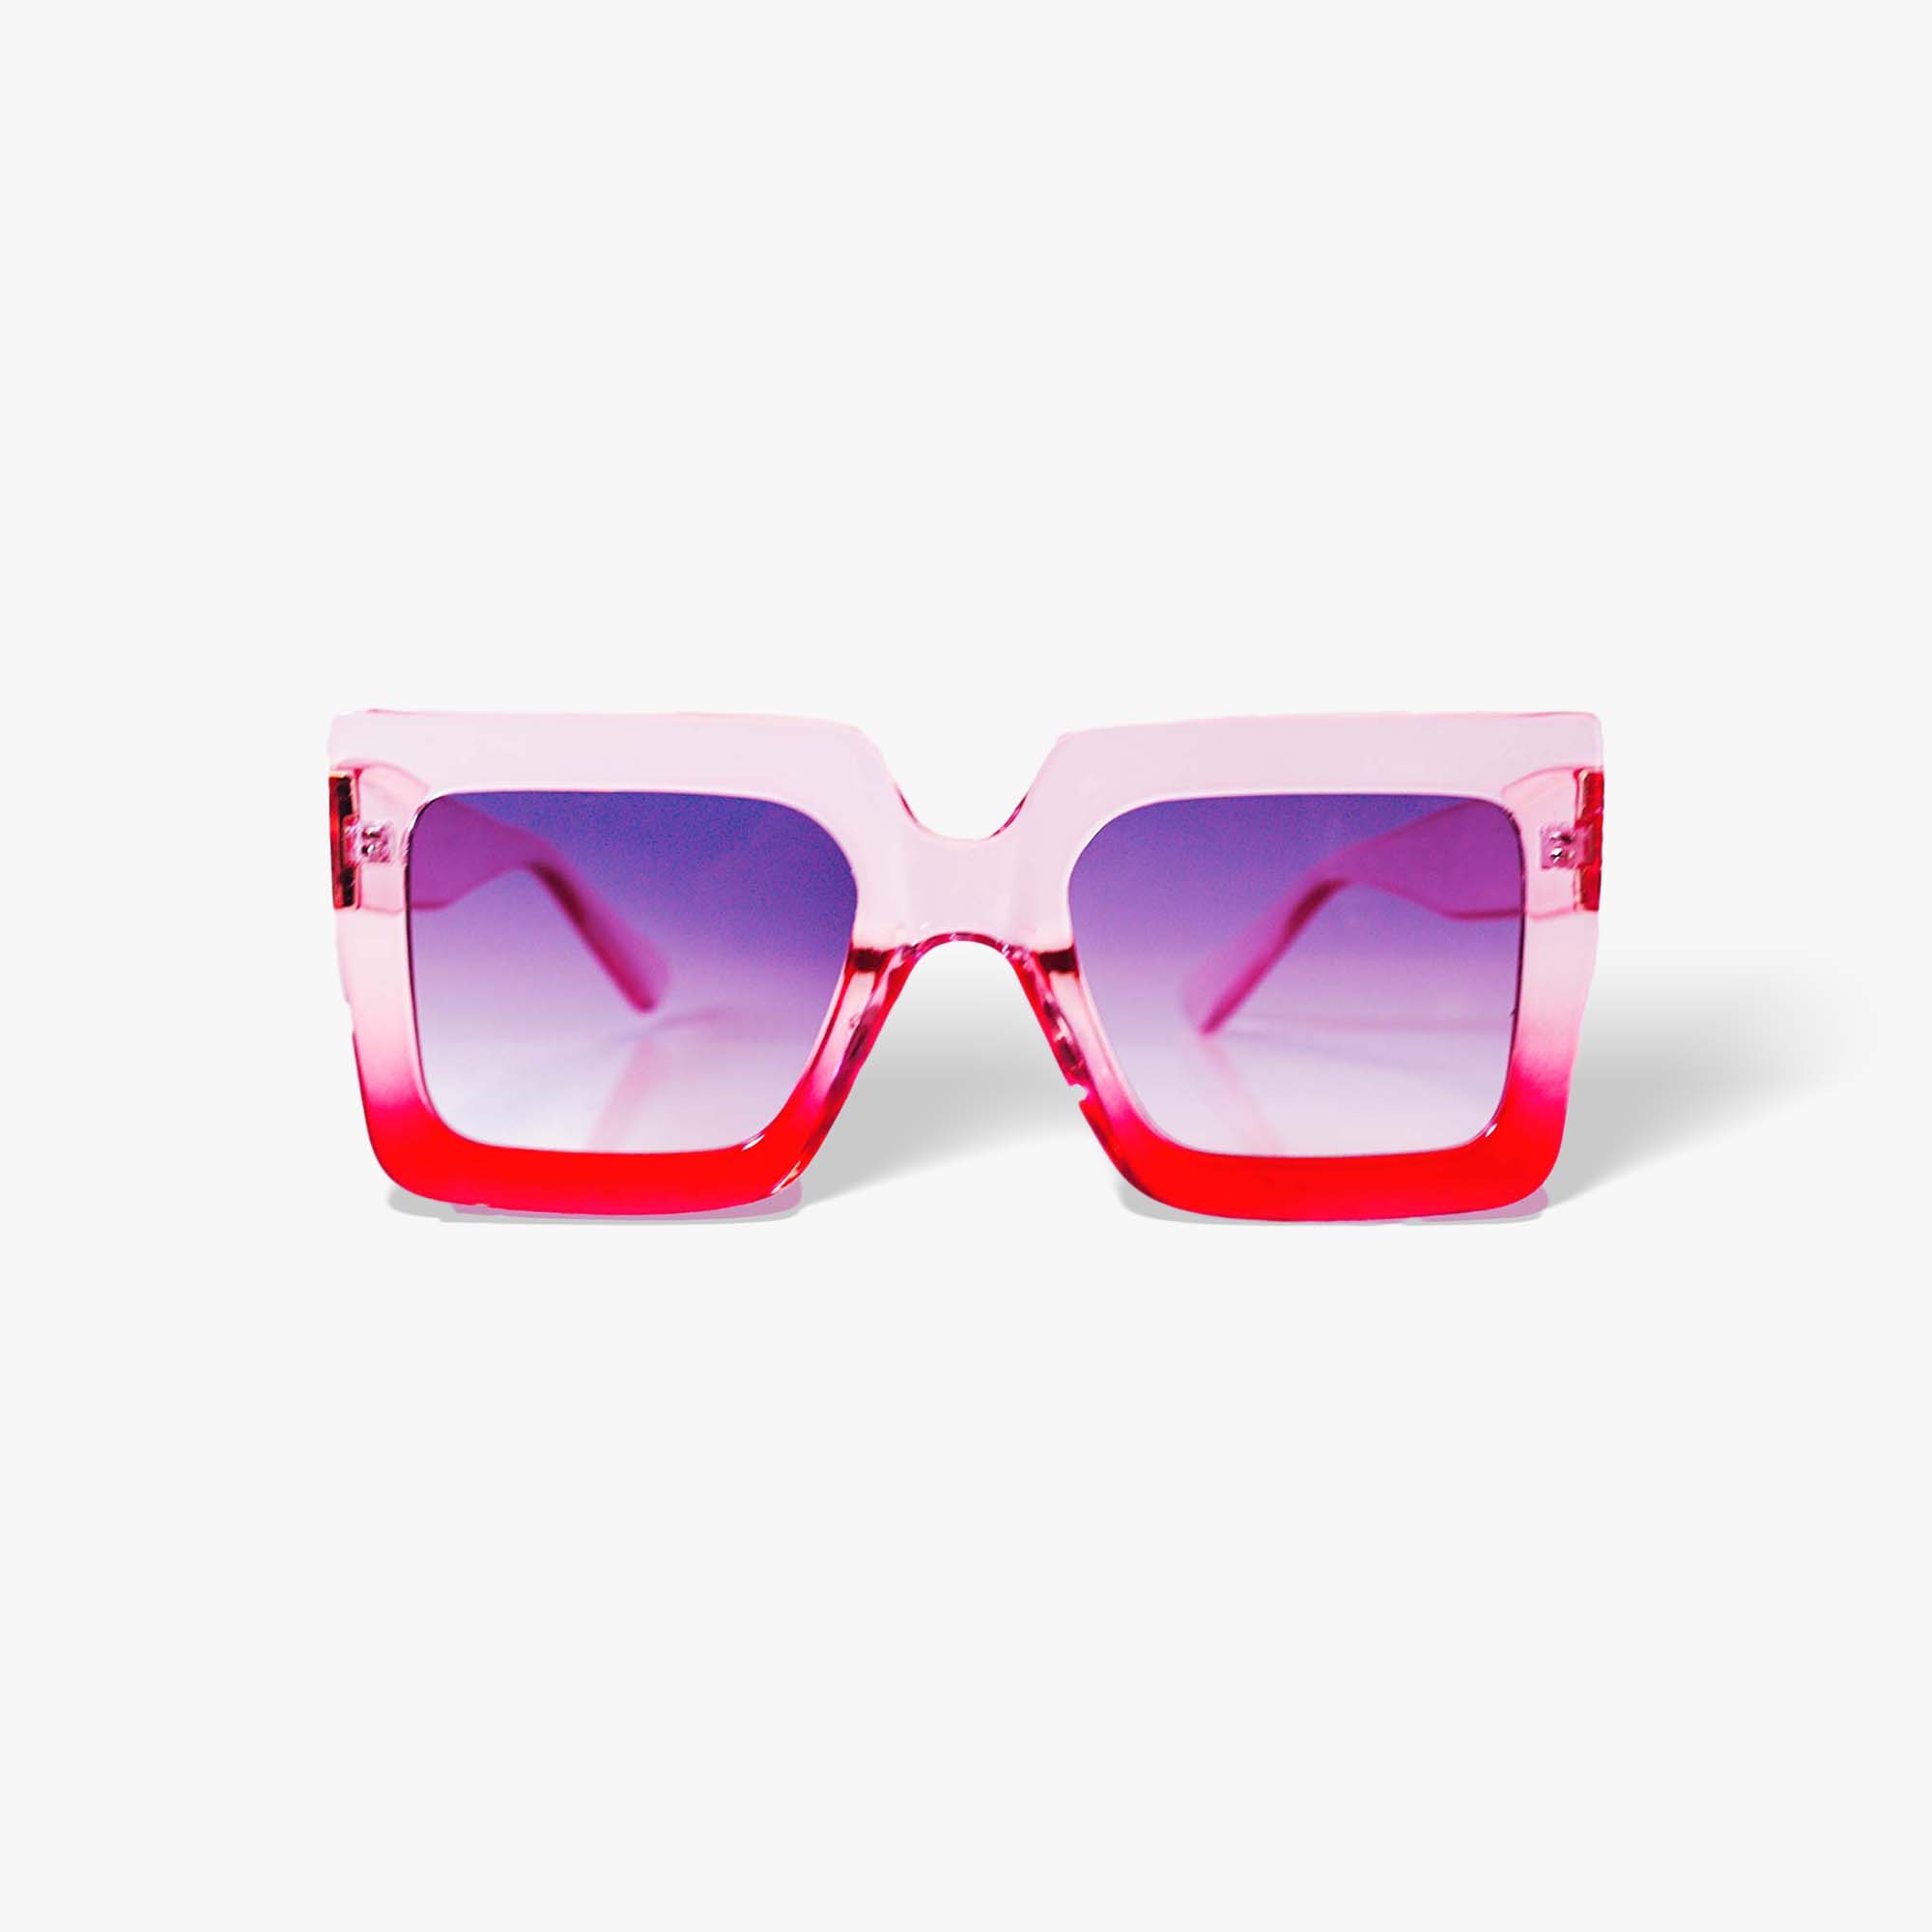 Candy Red Color Block Sunglasses